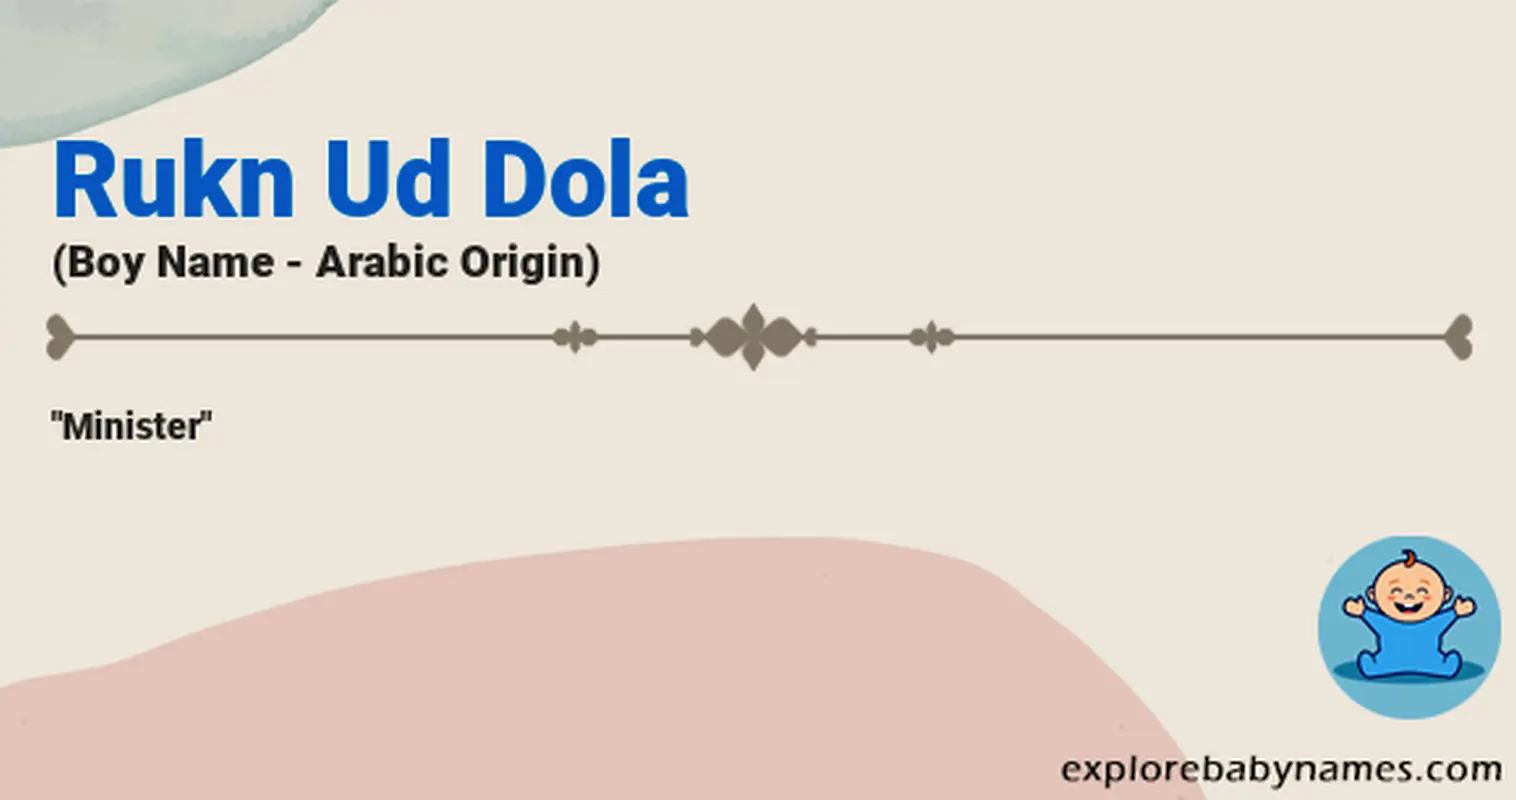 Meaning of Rukn Ud Dola